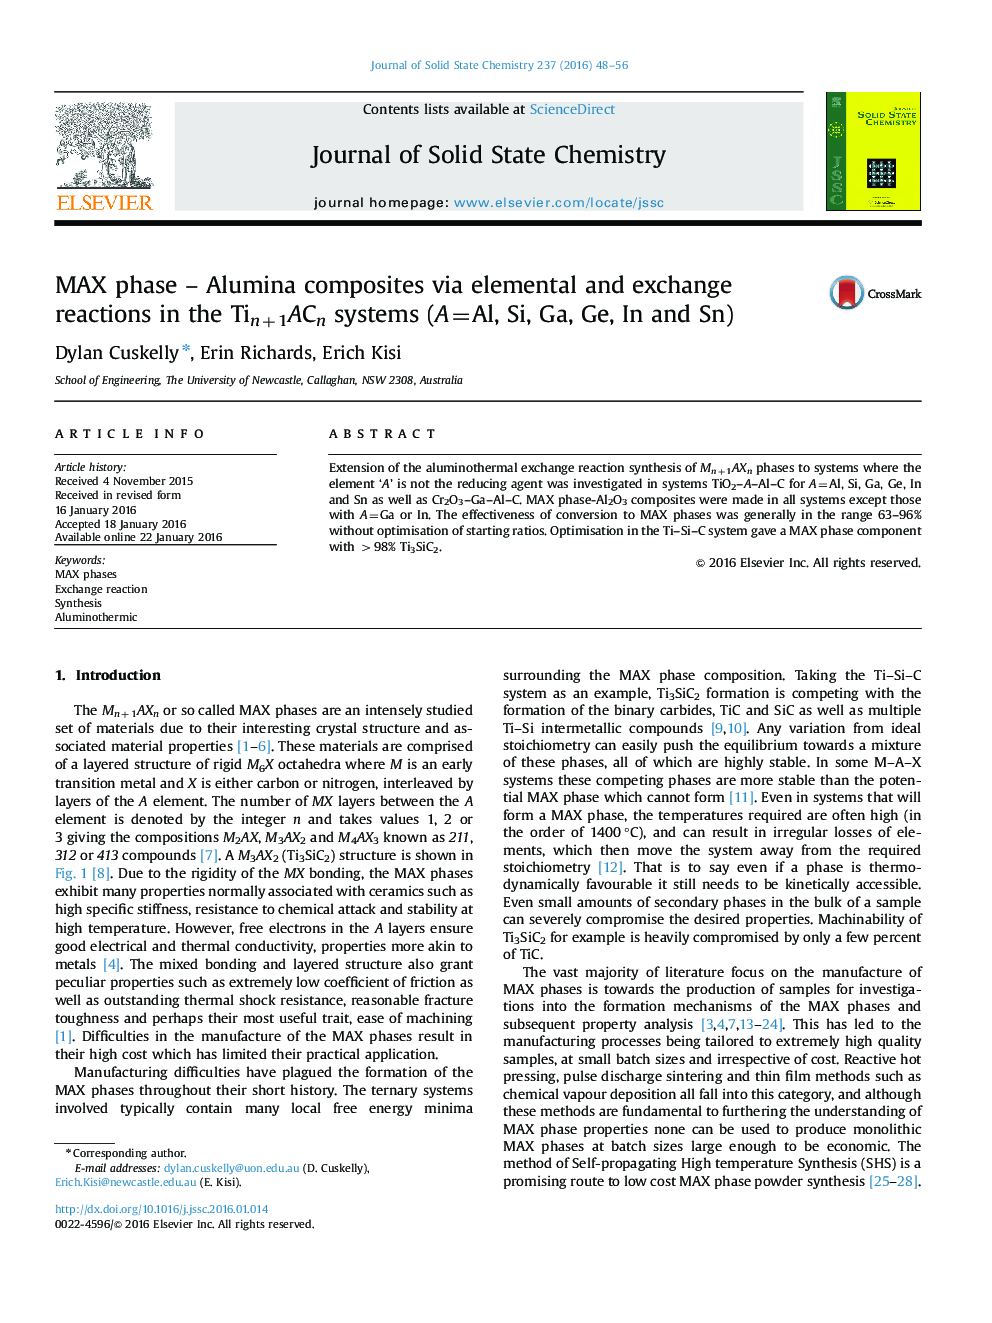 MAX phase - Alumina composites via elemental and exchange reactions in the Tin+1ACn systems (A=Al, Si, Ga, Ge, In and Sn)